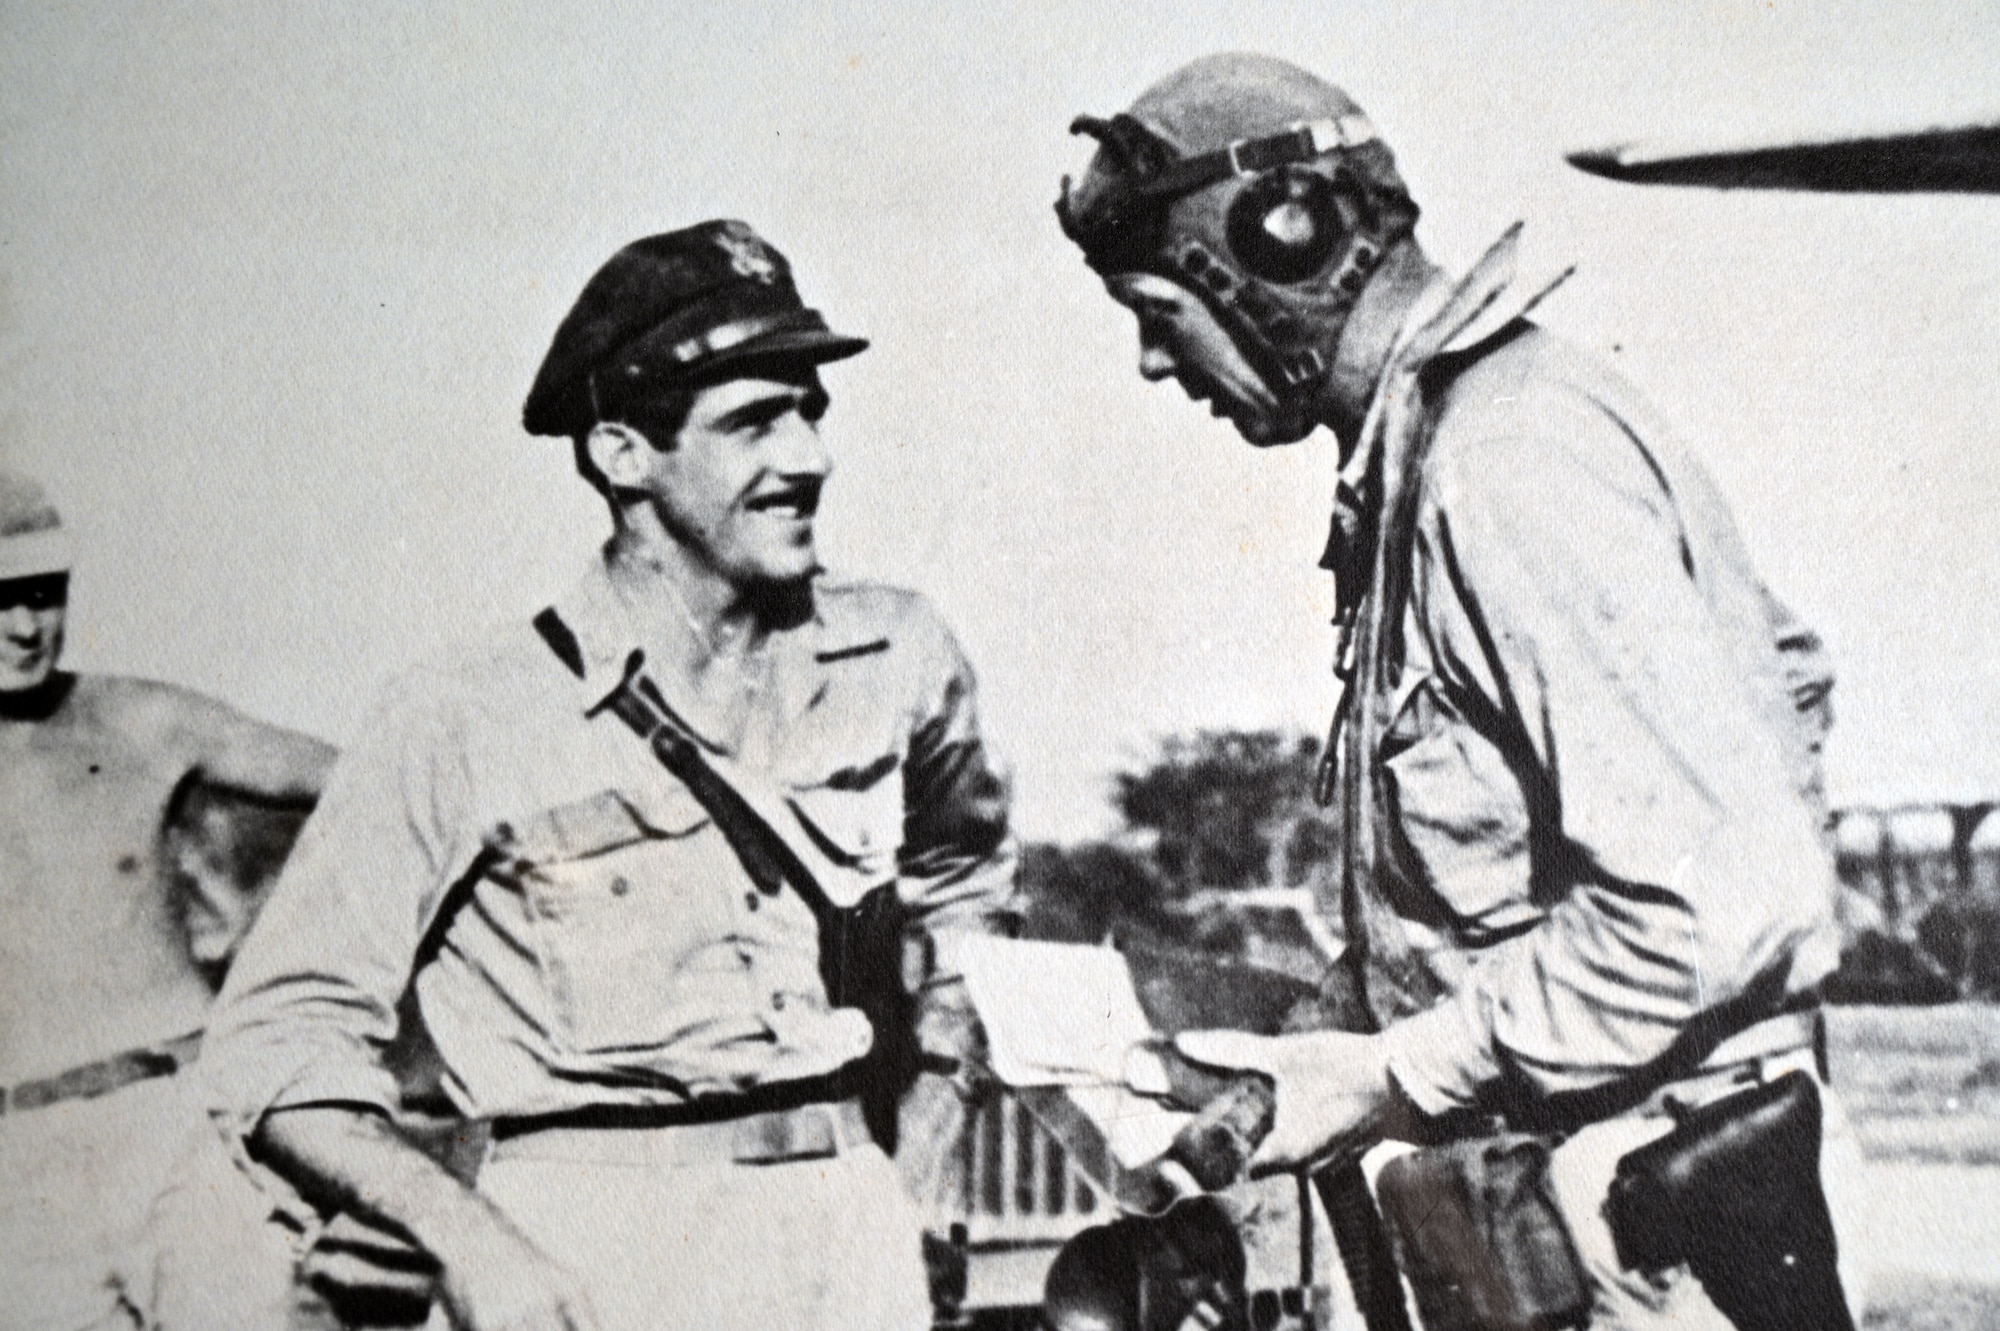 Maj. Thomas B. McGuire Jr.(left) with Charles A. Lindbergh during the Summer of 1944 in the Southwest Pacific theater during WWII